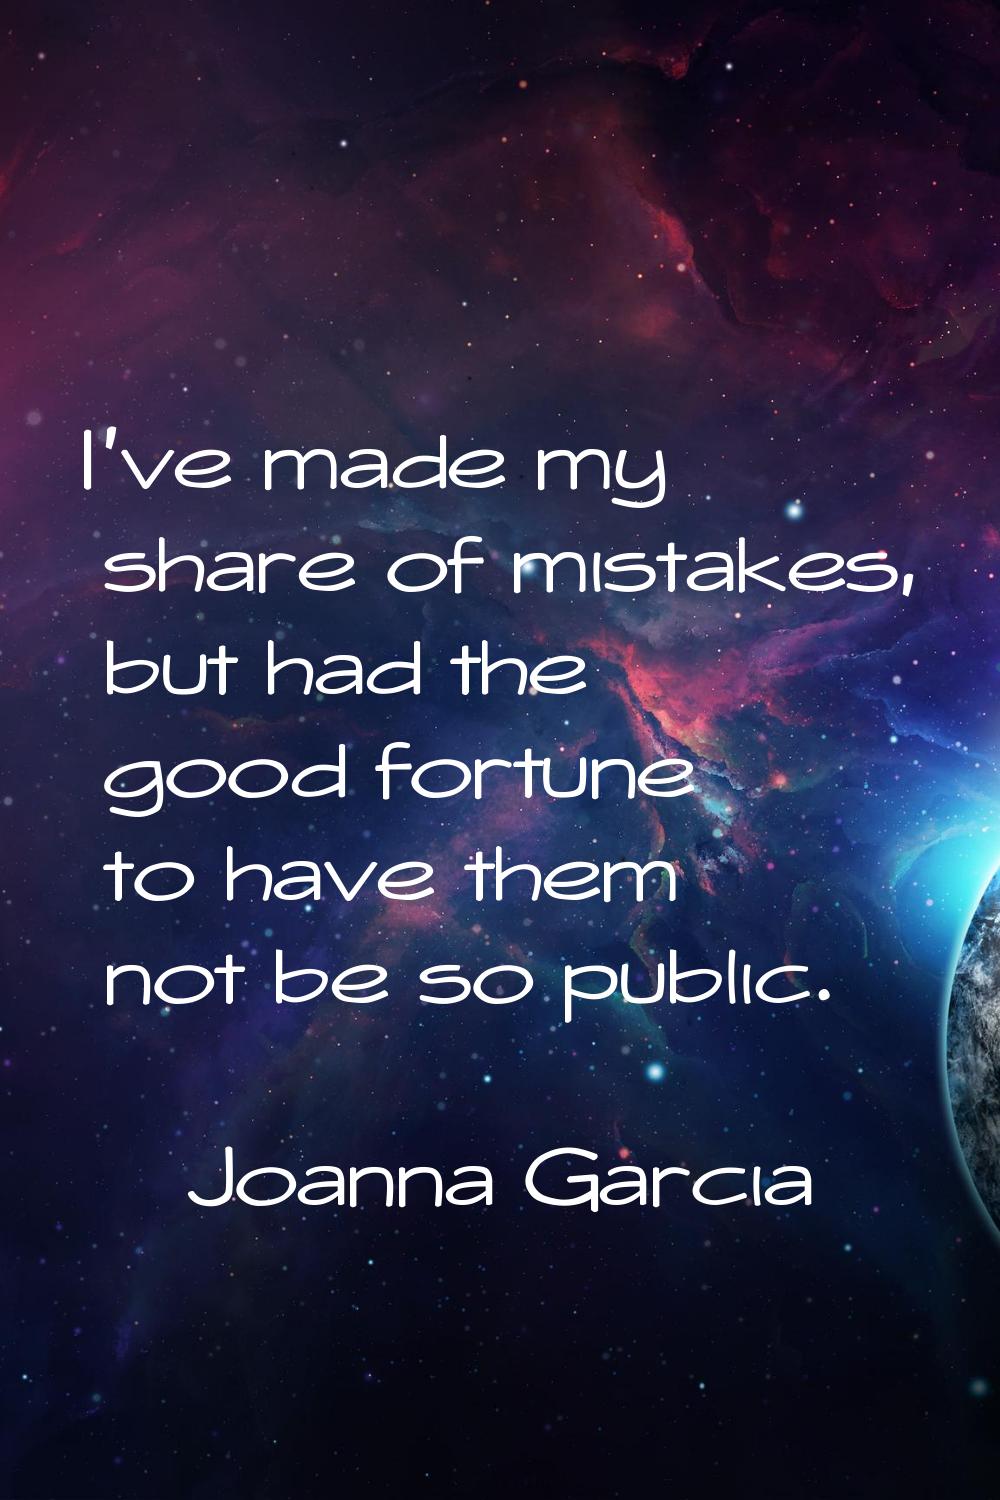 I've made my share of mistakes, but had the good fortune to have them not be so public.